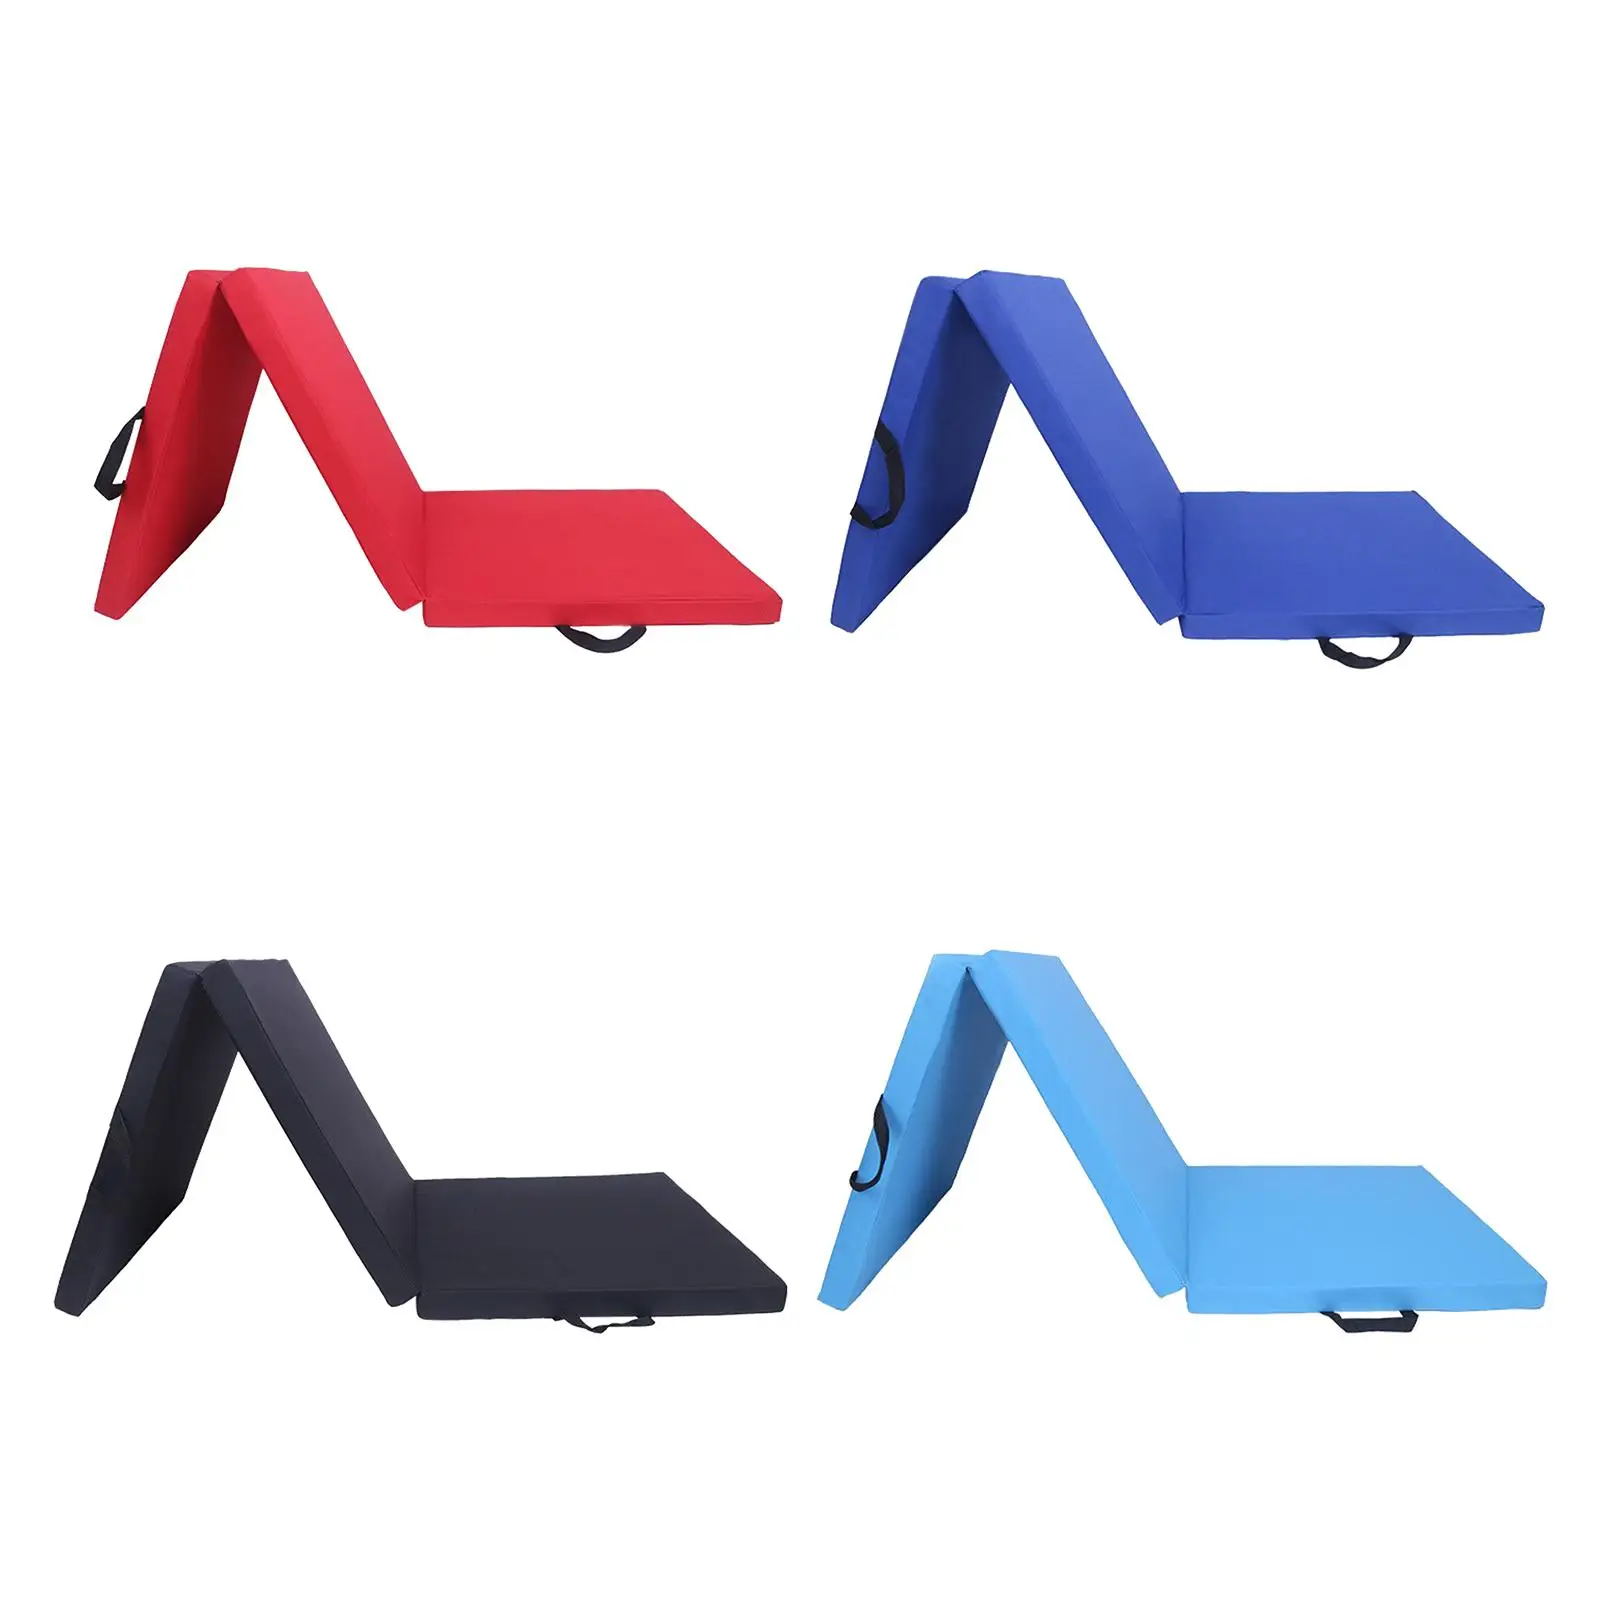 Three Fold Folding Exercise Mat with Carrying Handle for Fitness Training